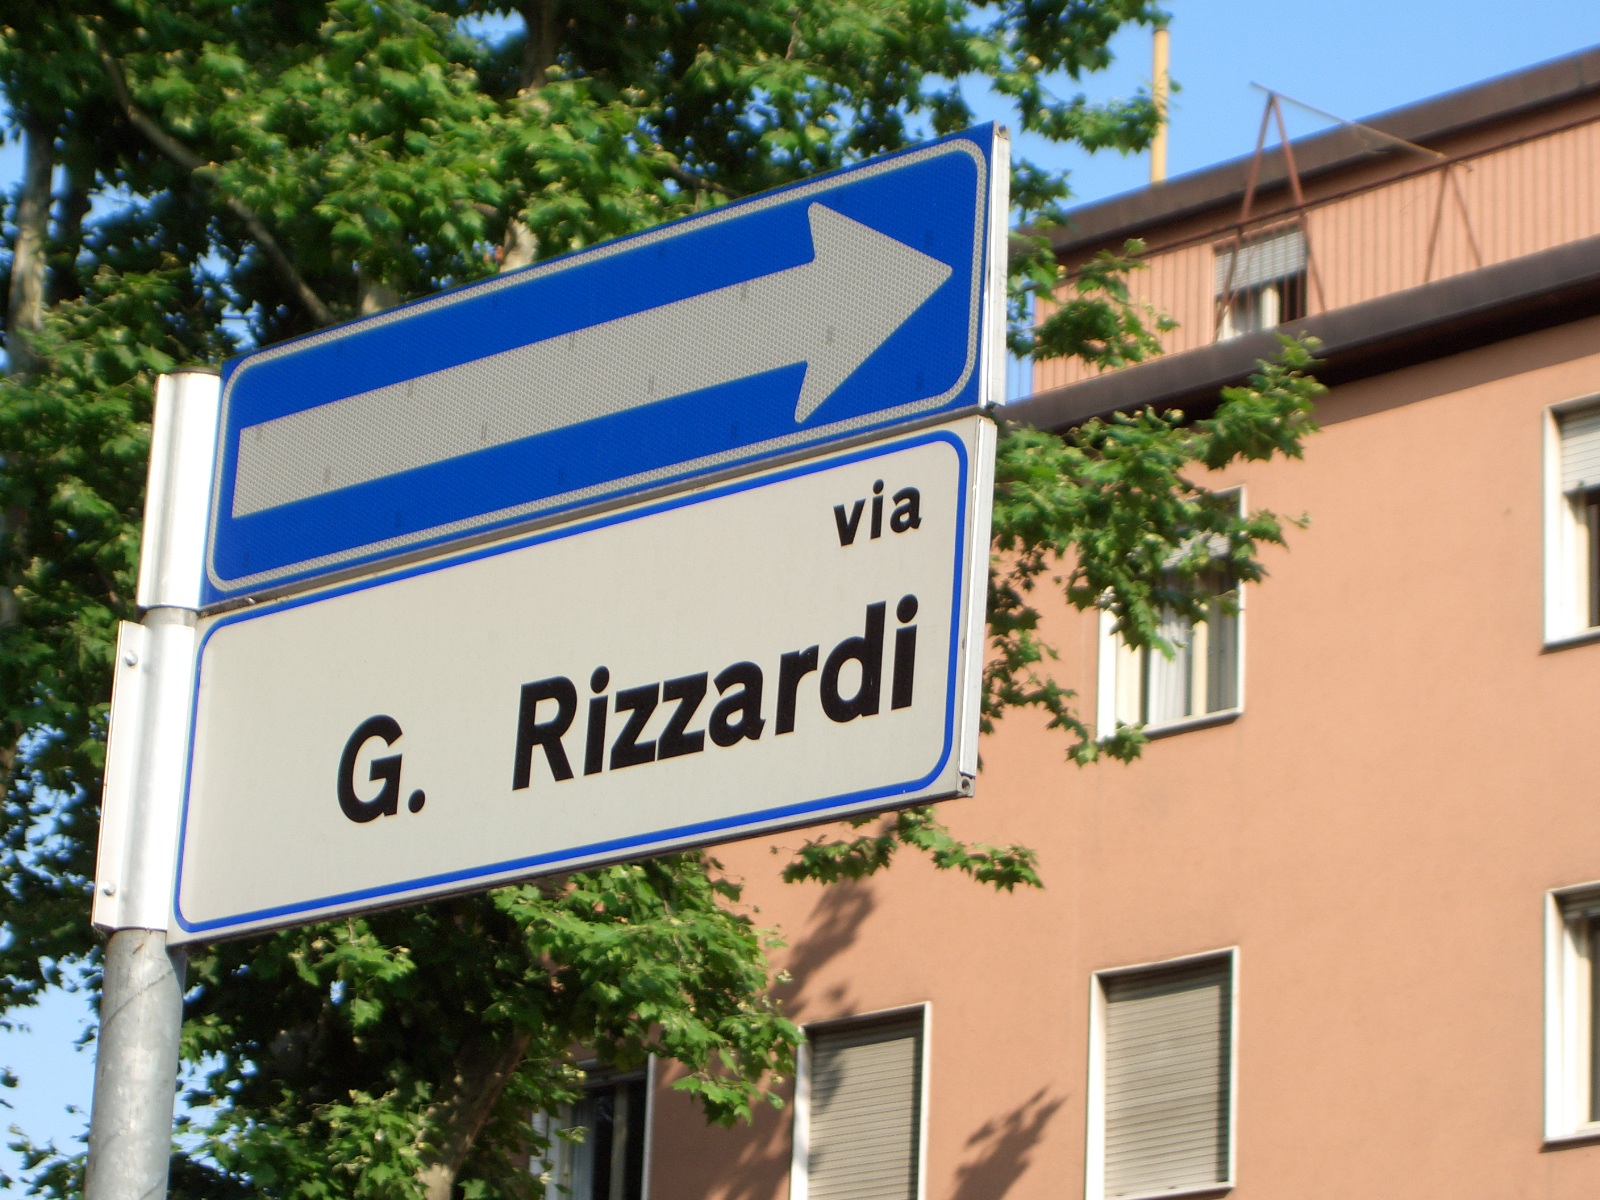 a blue and white street sign in front of a building